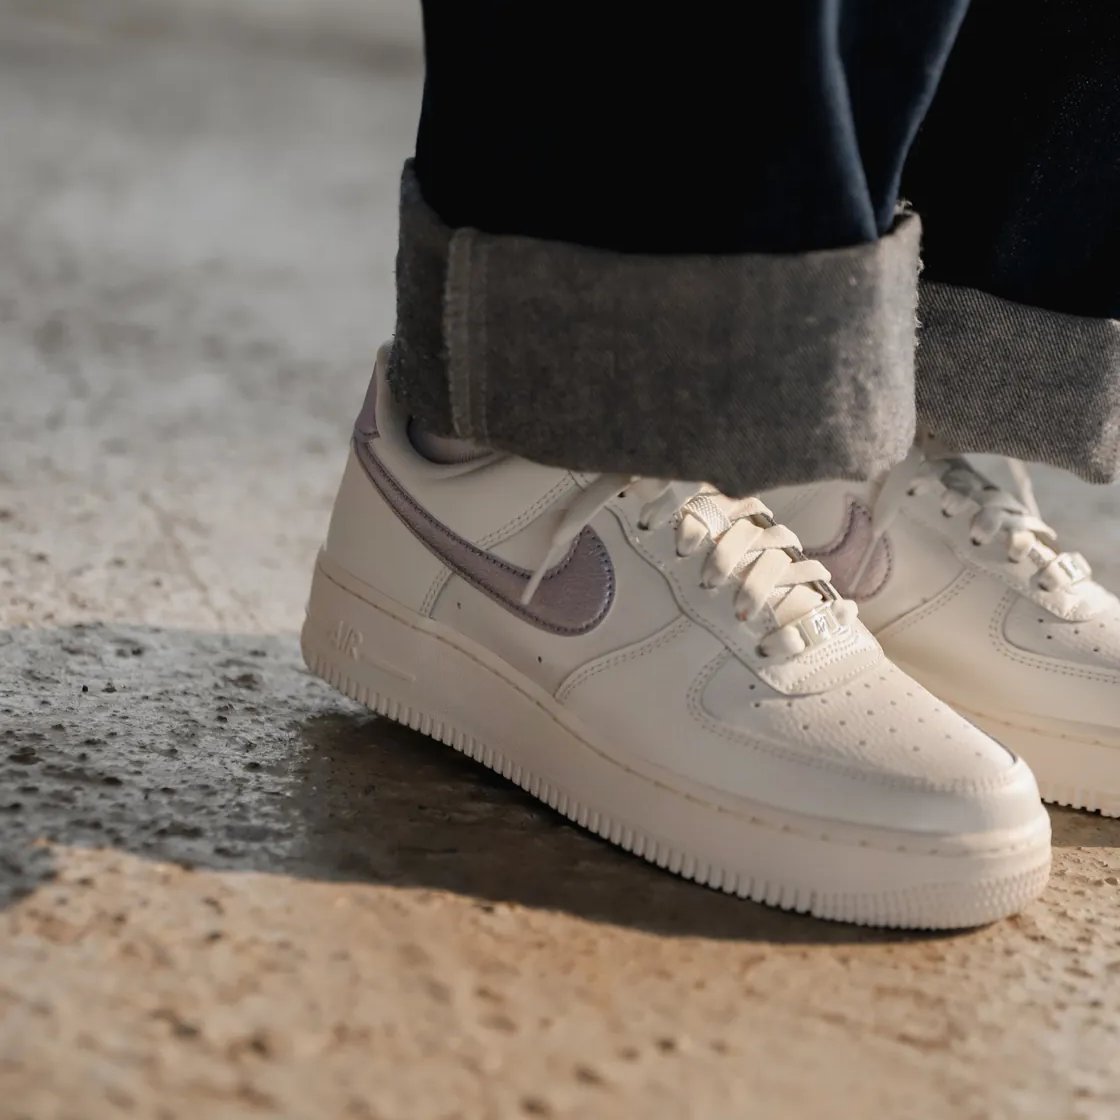 Nike Wmns Air Force 1 07 LX AF1 Athletic Club Grey Women Casual Shoes  DQ5079-001